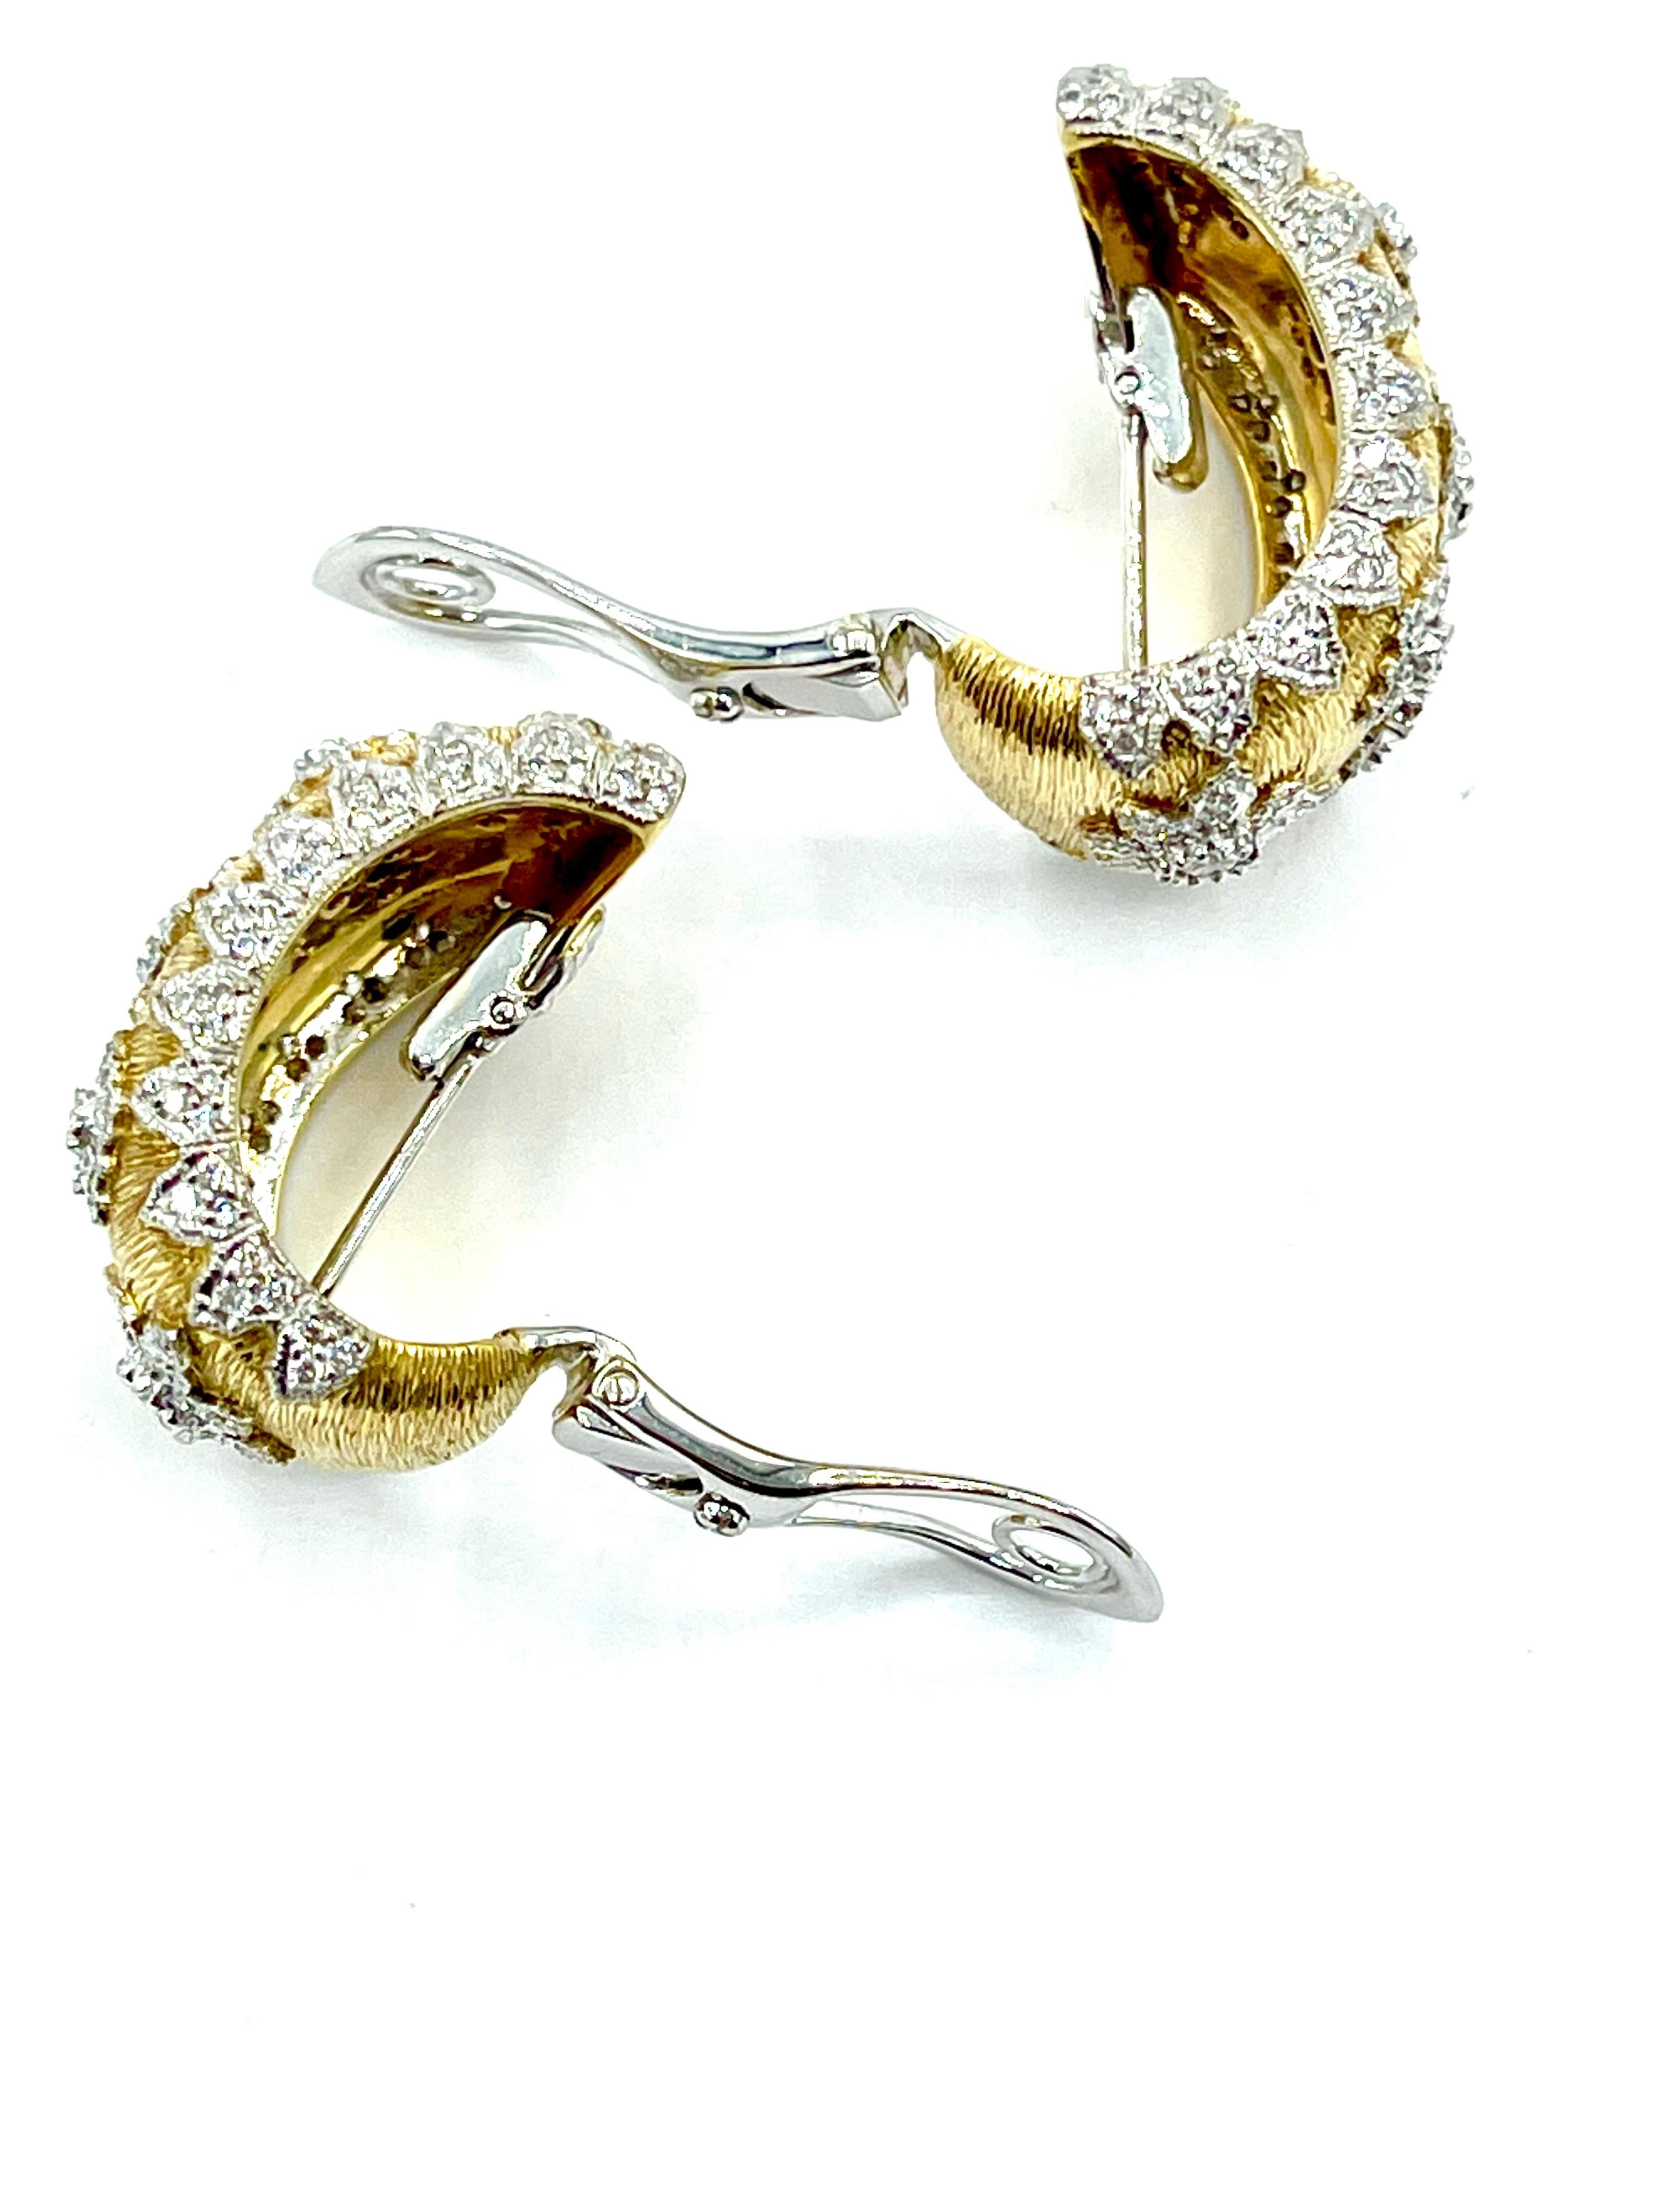 Women's or Men's 1.71 Carat Diamond and 18 Karat White and Yellow Gold Clip and Post Earrings